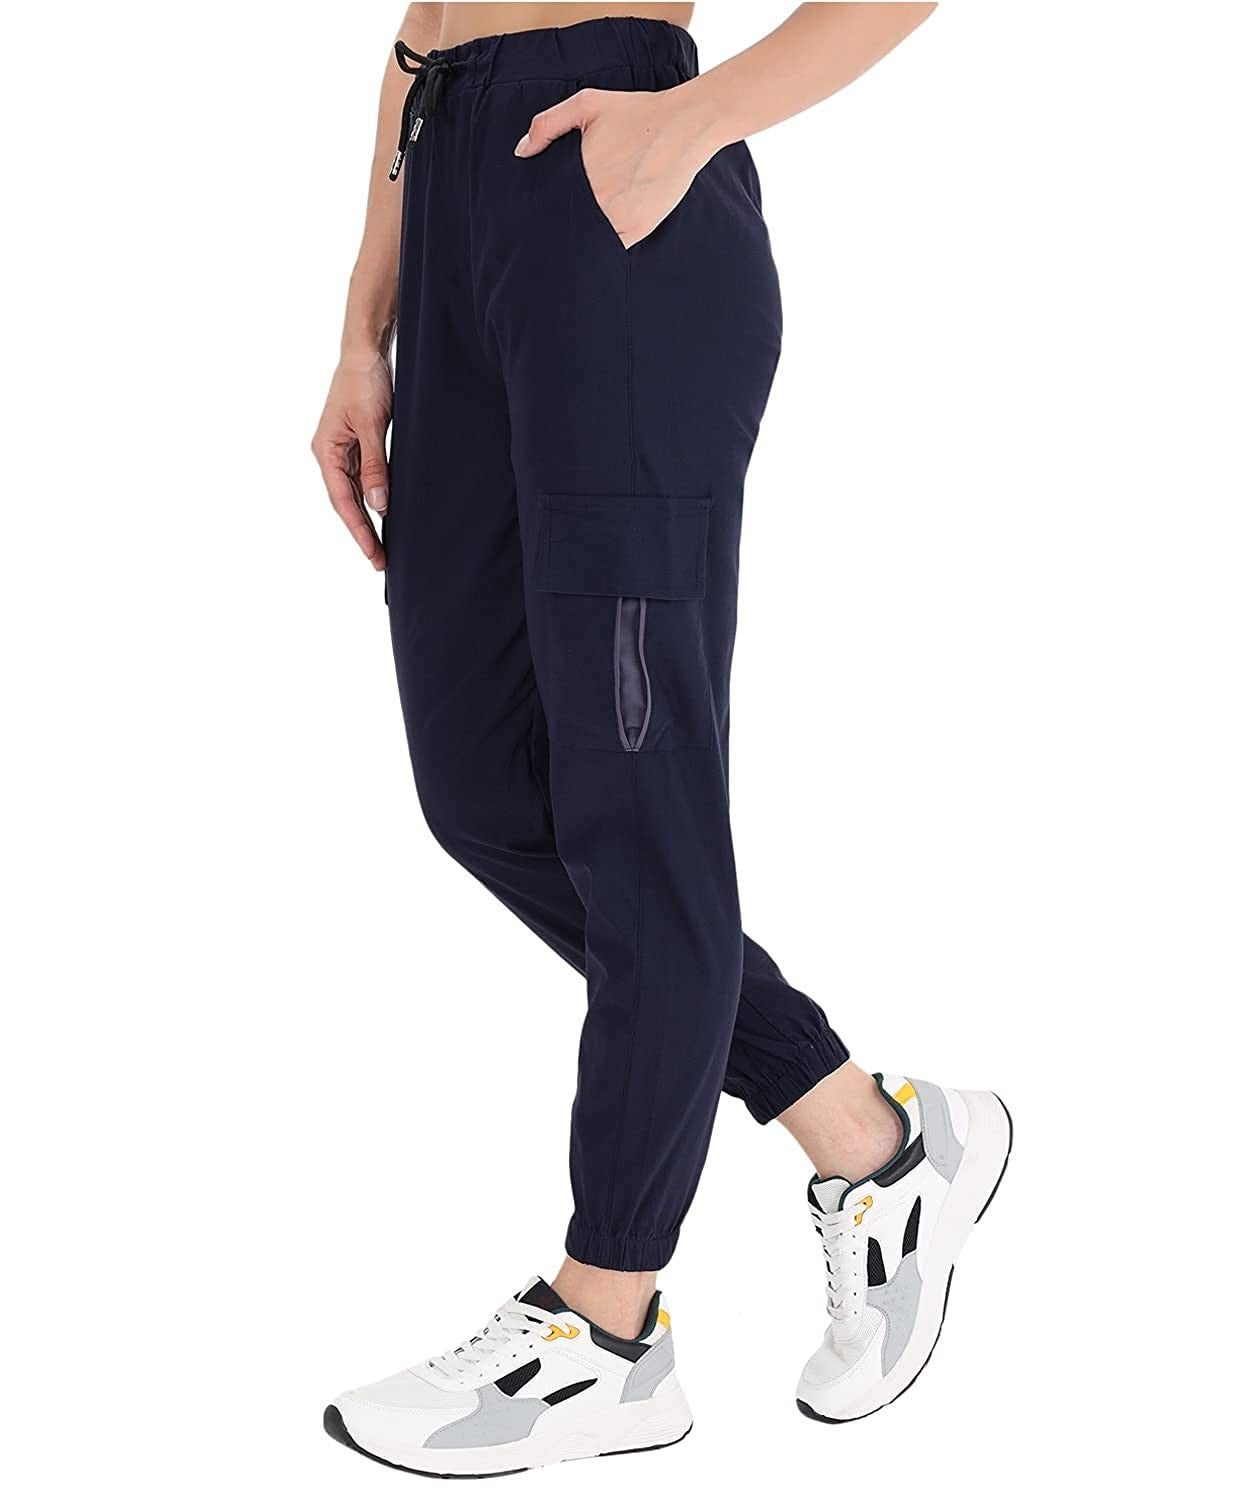 The model in the image is wearing Pant Blue Double Pocket Corgo Pant from Alice Milan. Crafted with the finest materials and impeccable attention to detail, the Cargo Pant looks premium, trendy, luxurious and offers unparalleled comfort. It’s a perfect clothing option for loungewear, resort wear, party wear or for an airport look. The woman in the image looks happy, and confident with her style statement putting a happy smile on her face.